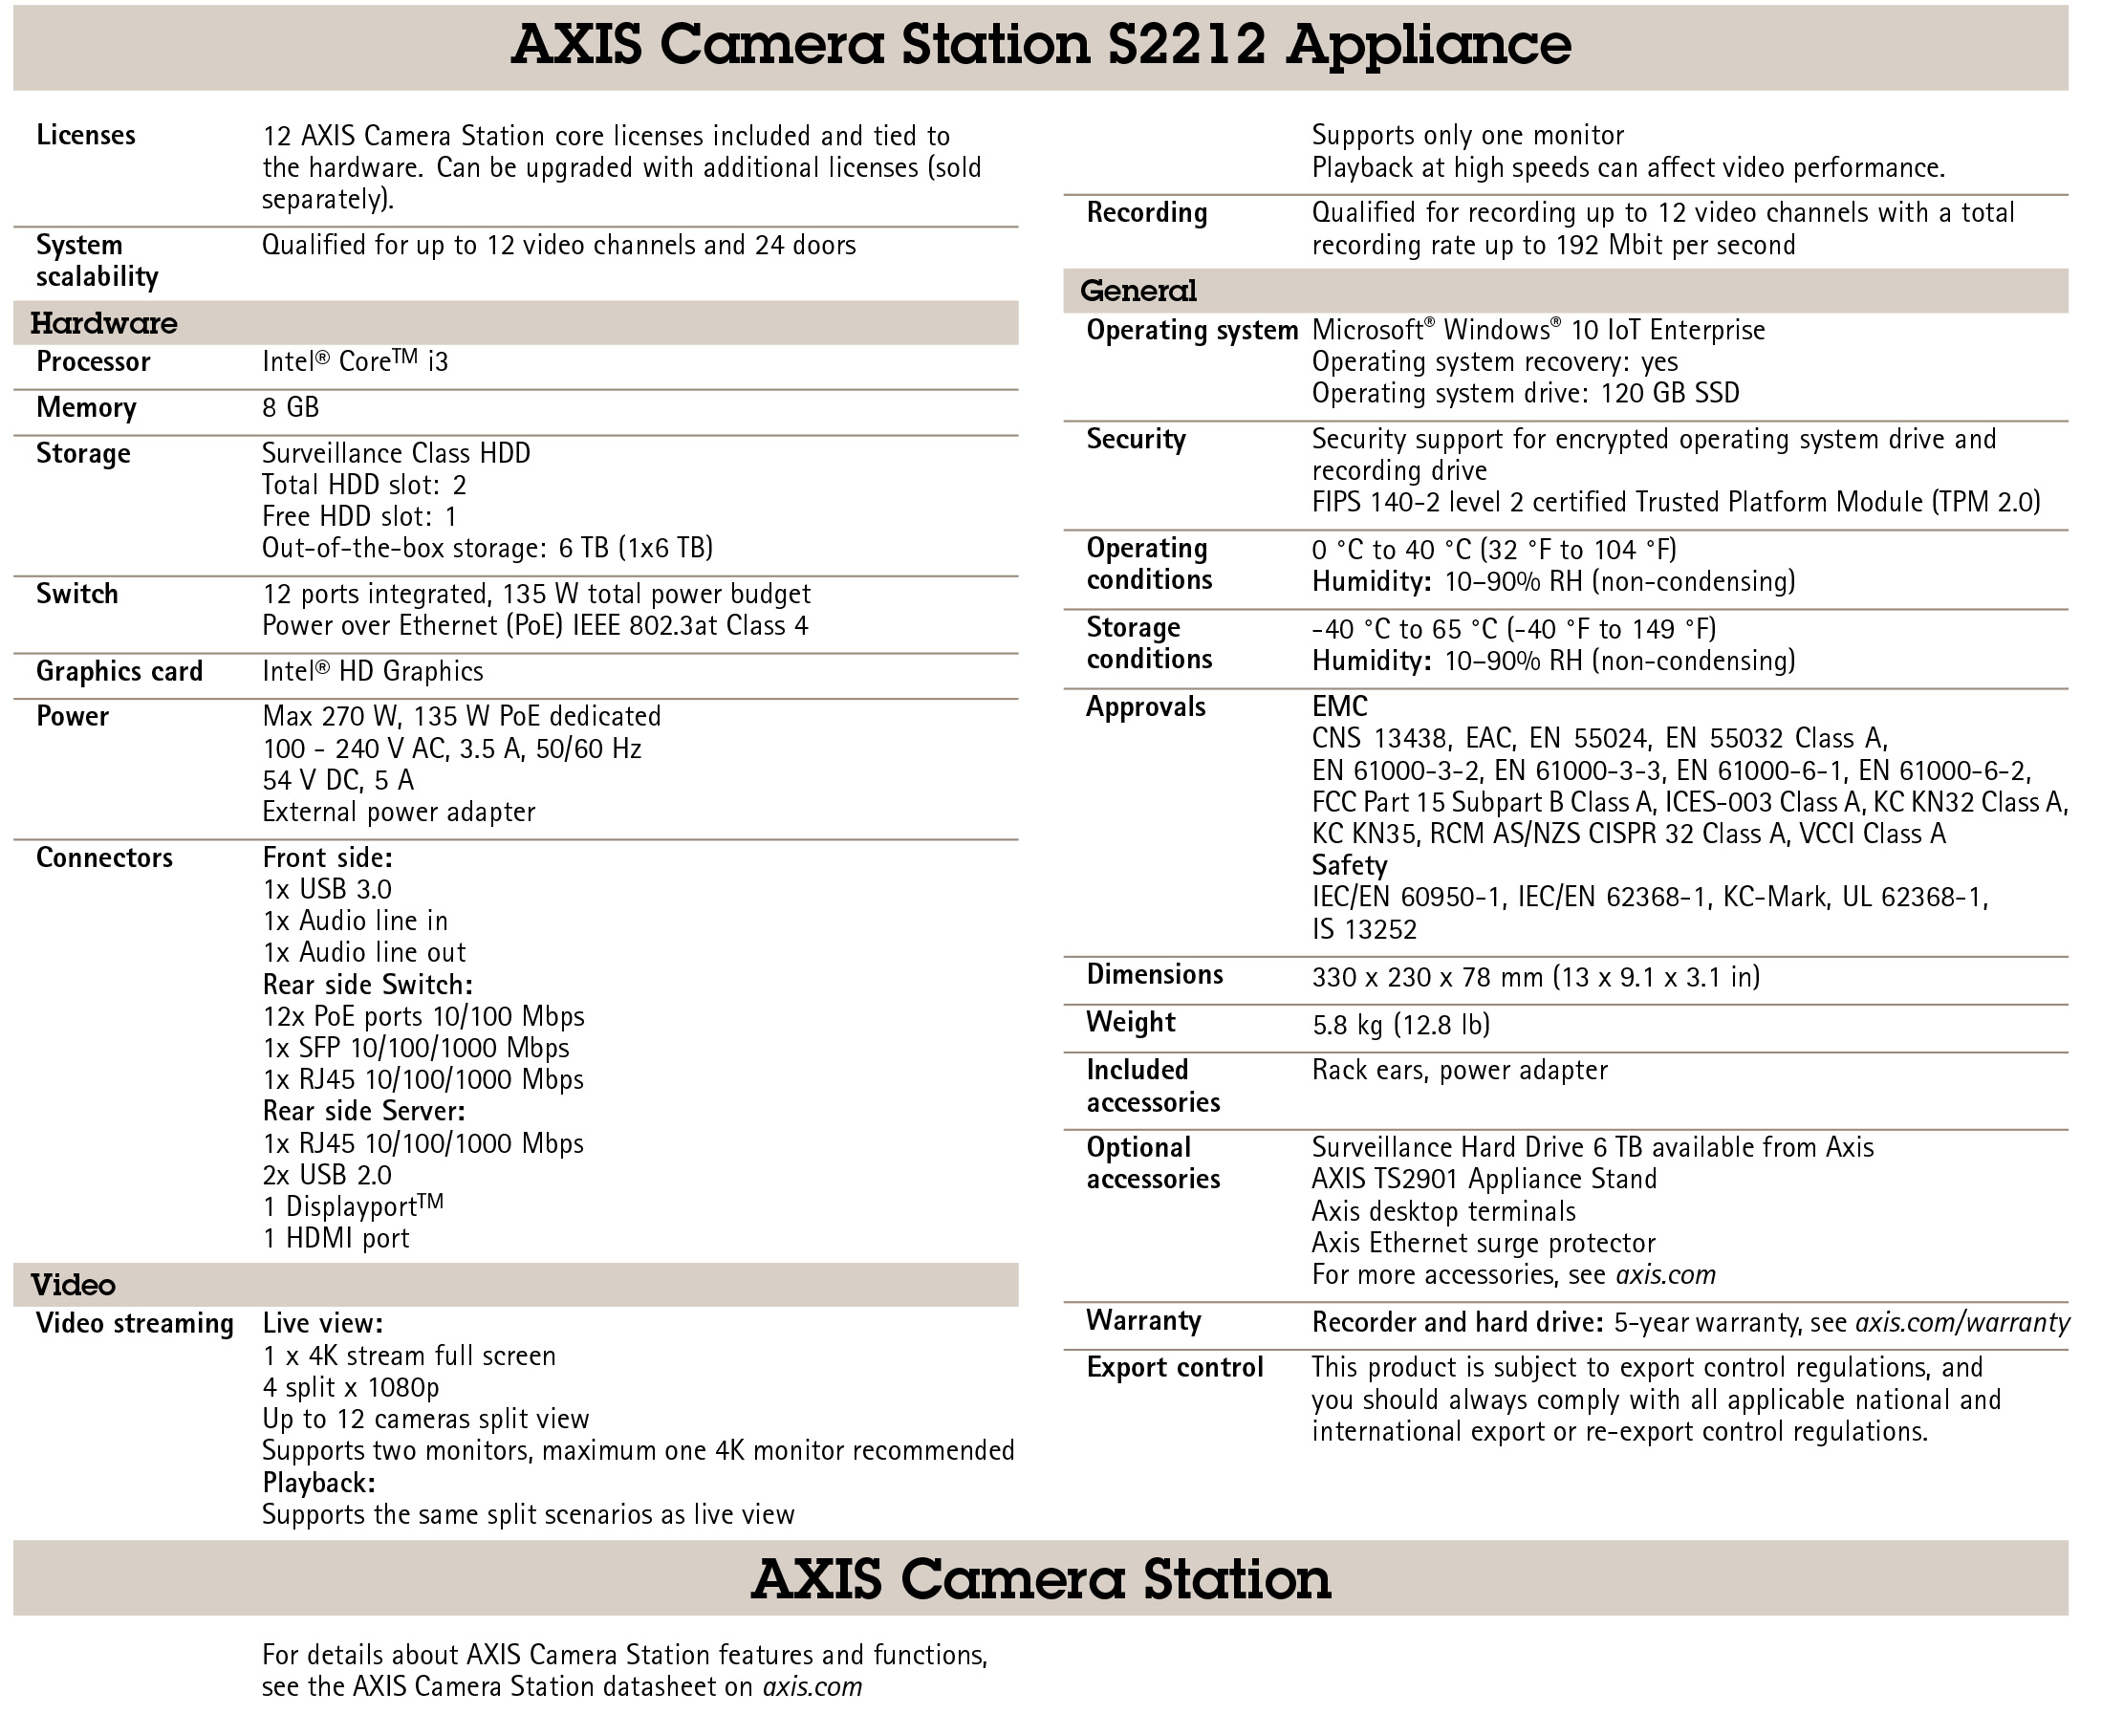 AXIS Camera Station S2212 Appliance